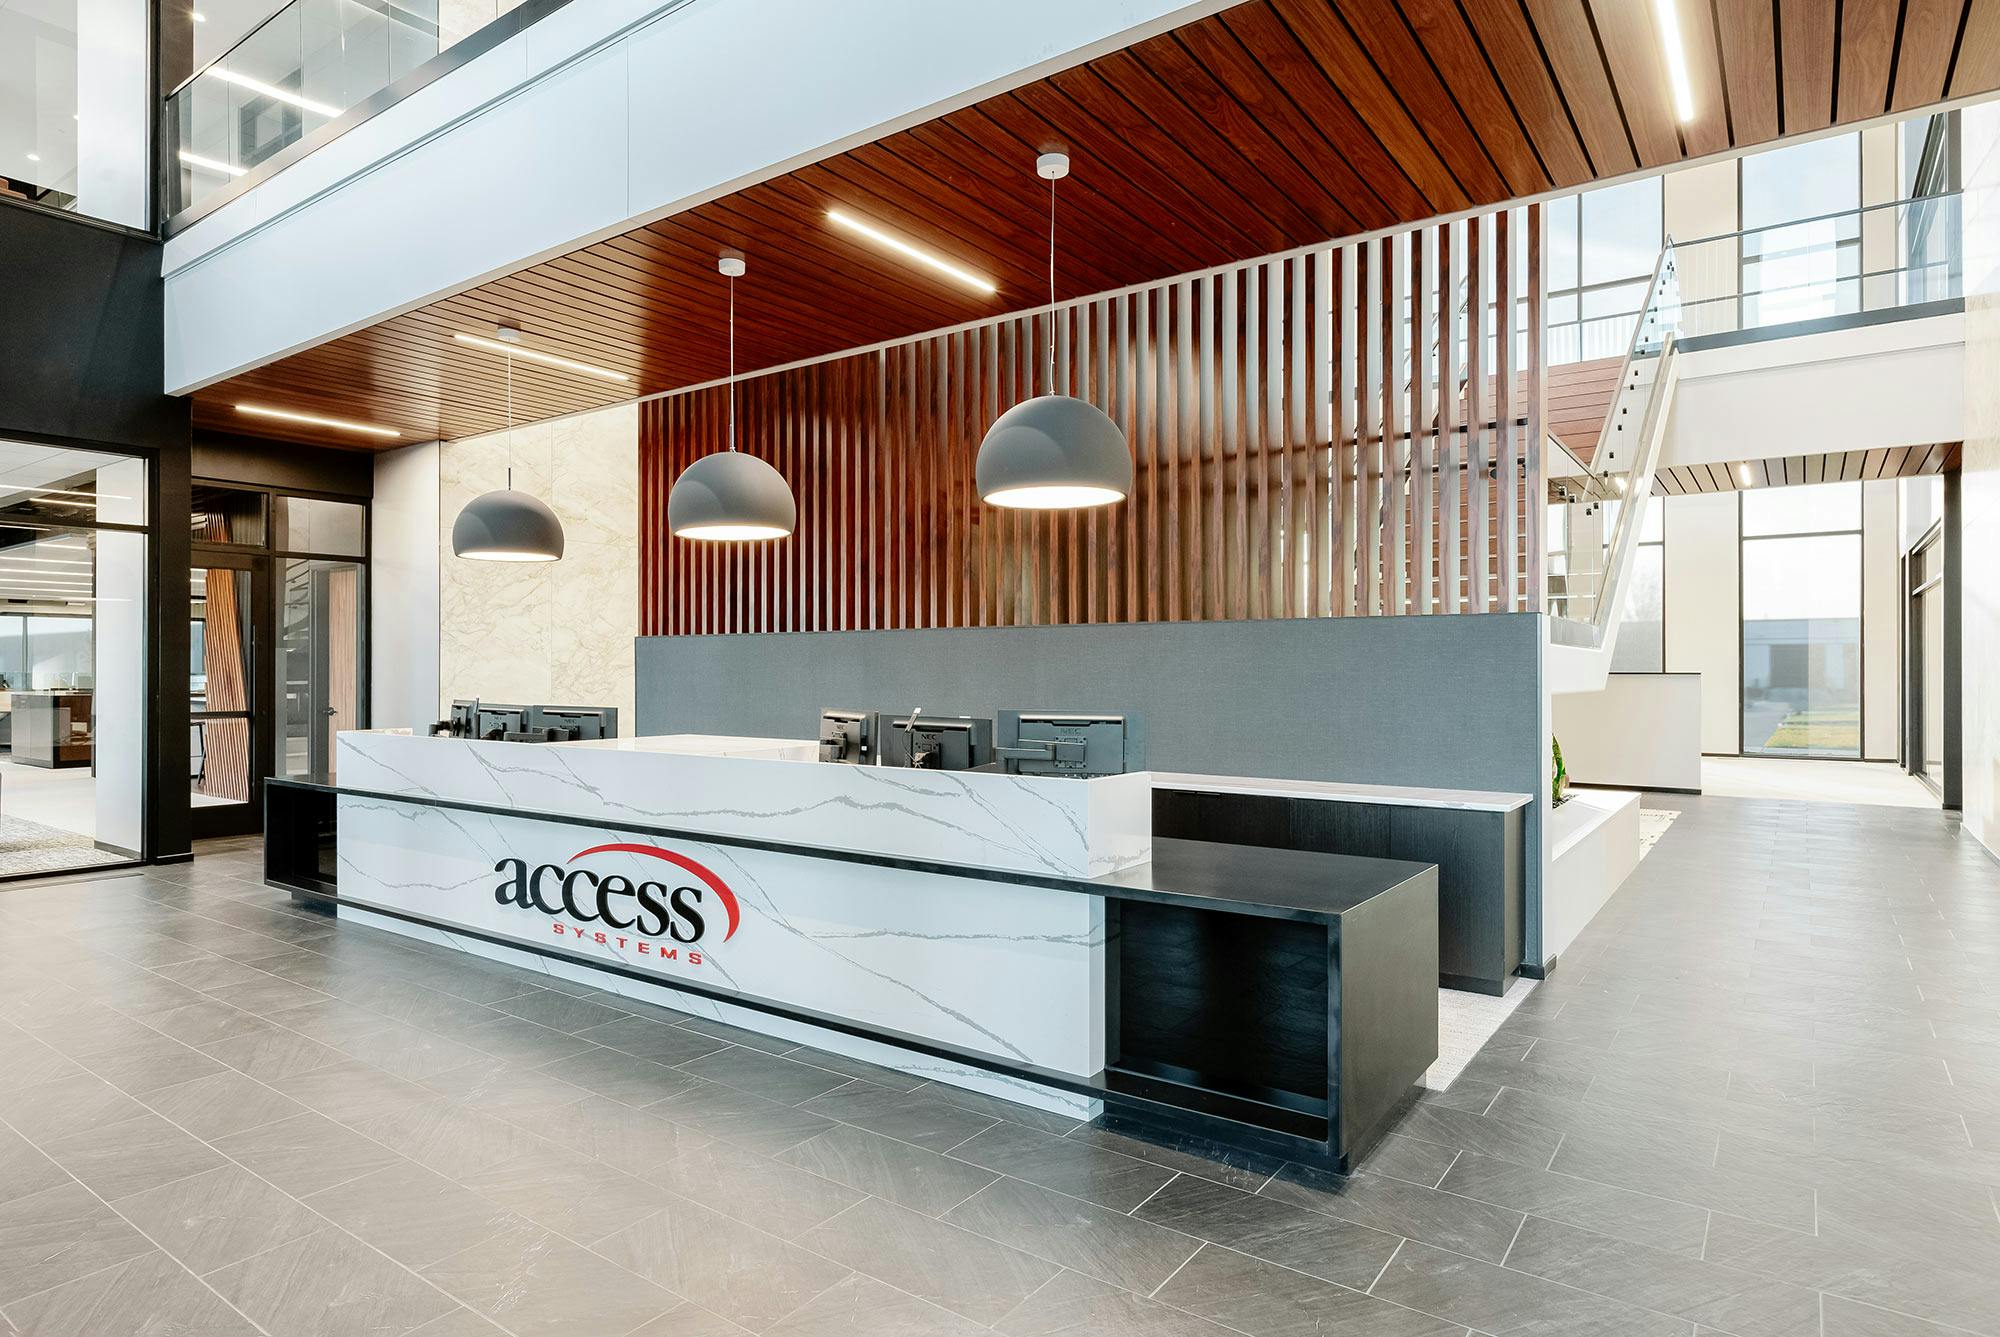 Dekton and Silestone Offer High-End Finishes to the Access Systems Headquarters